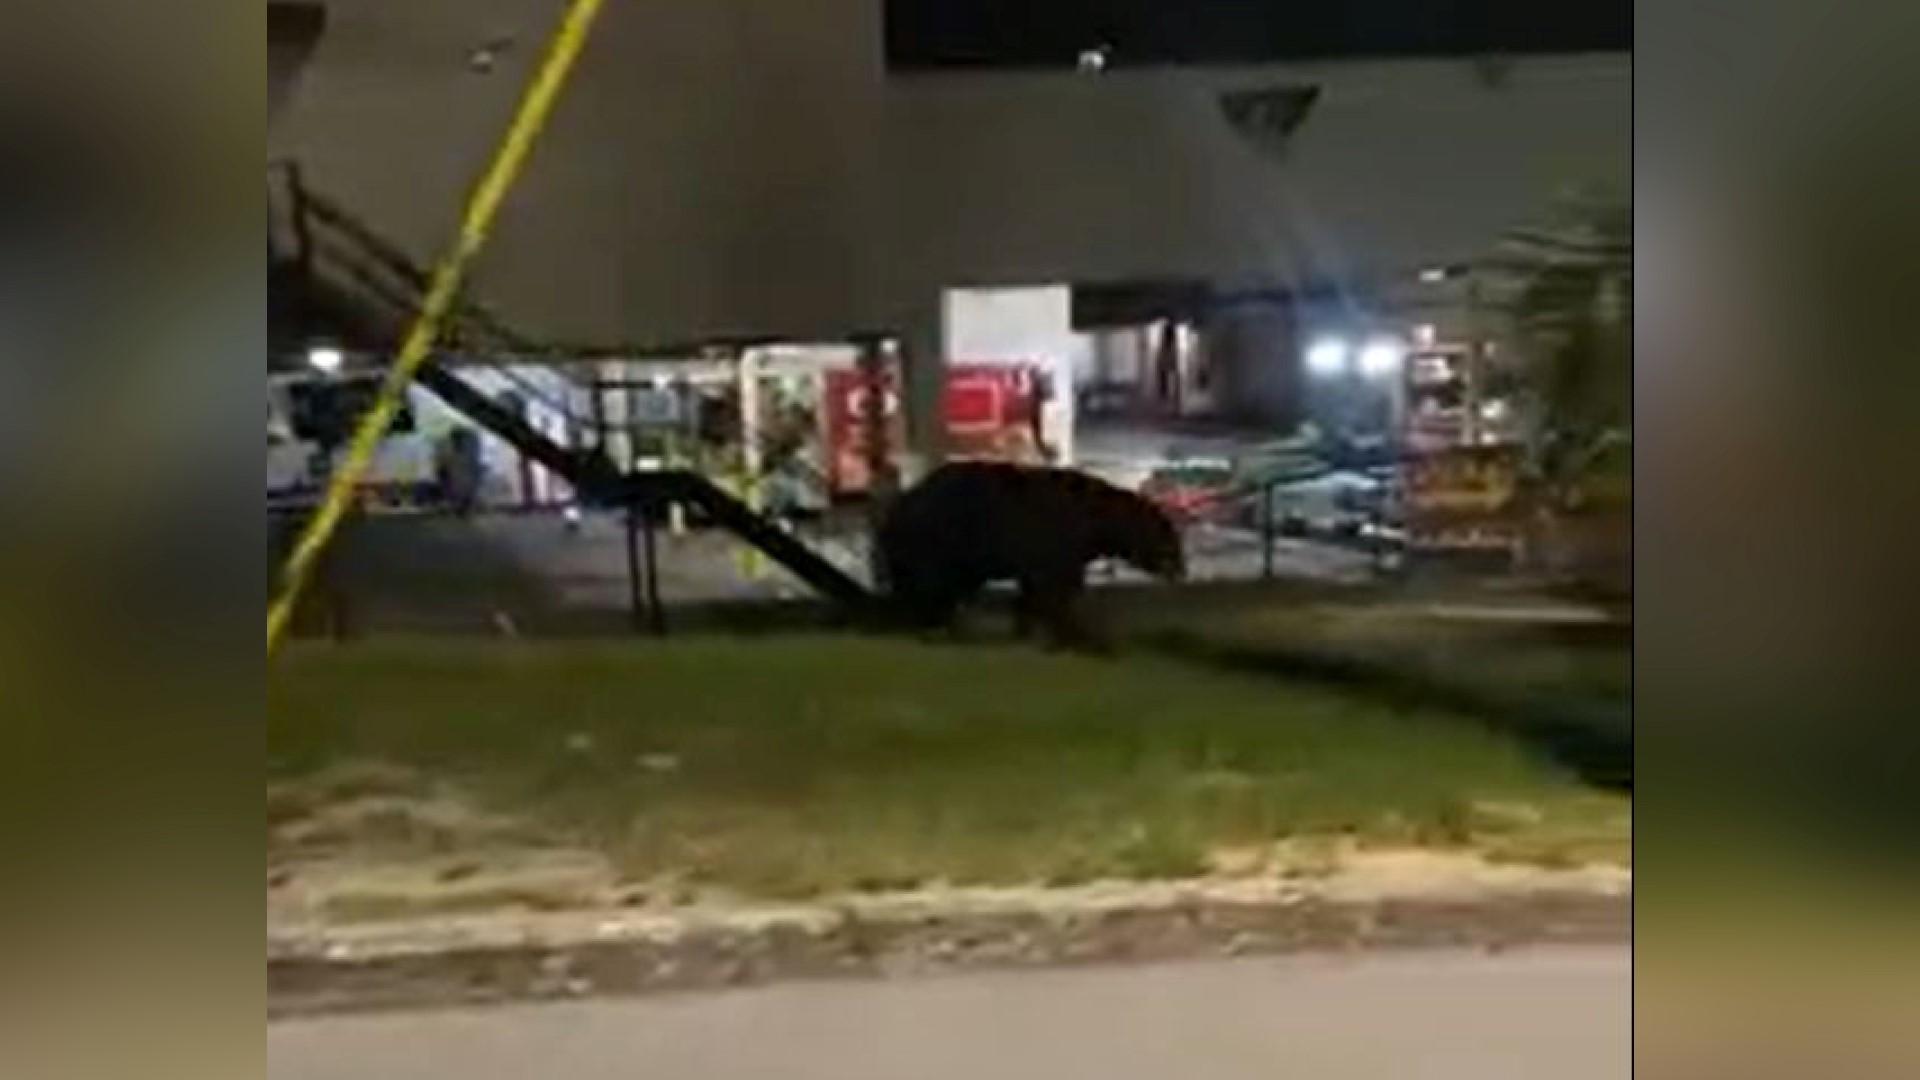 The Haines City Police Department posted video of a Florida black bear walking through downtown.